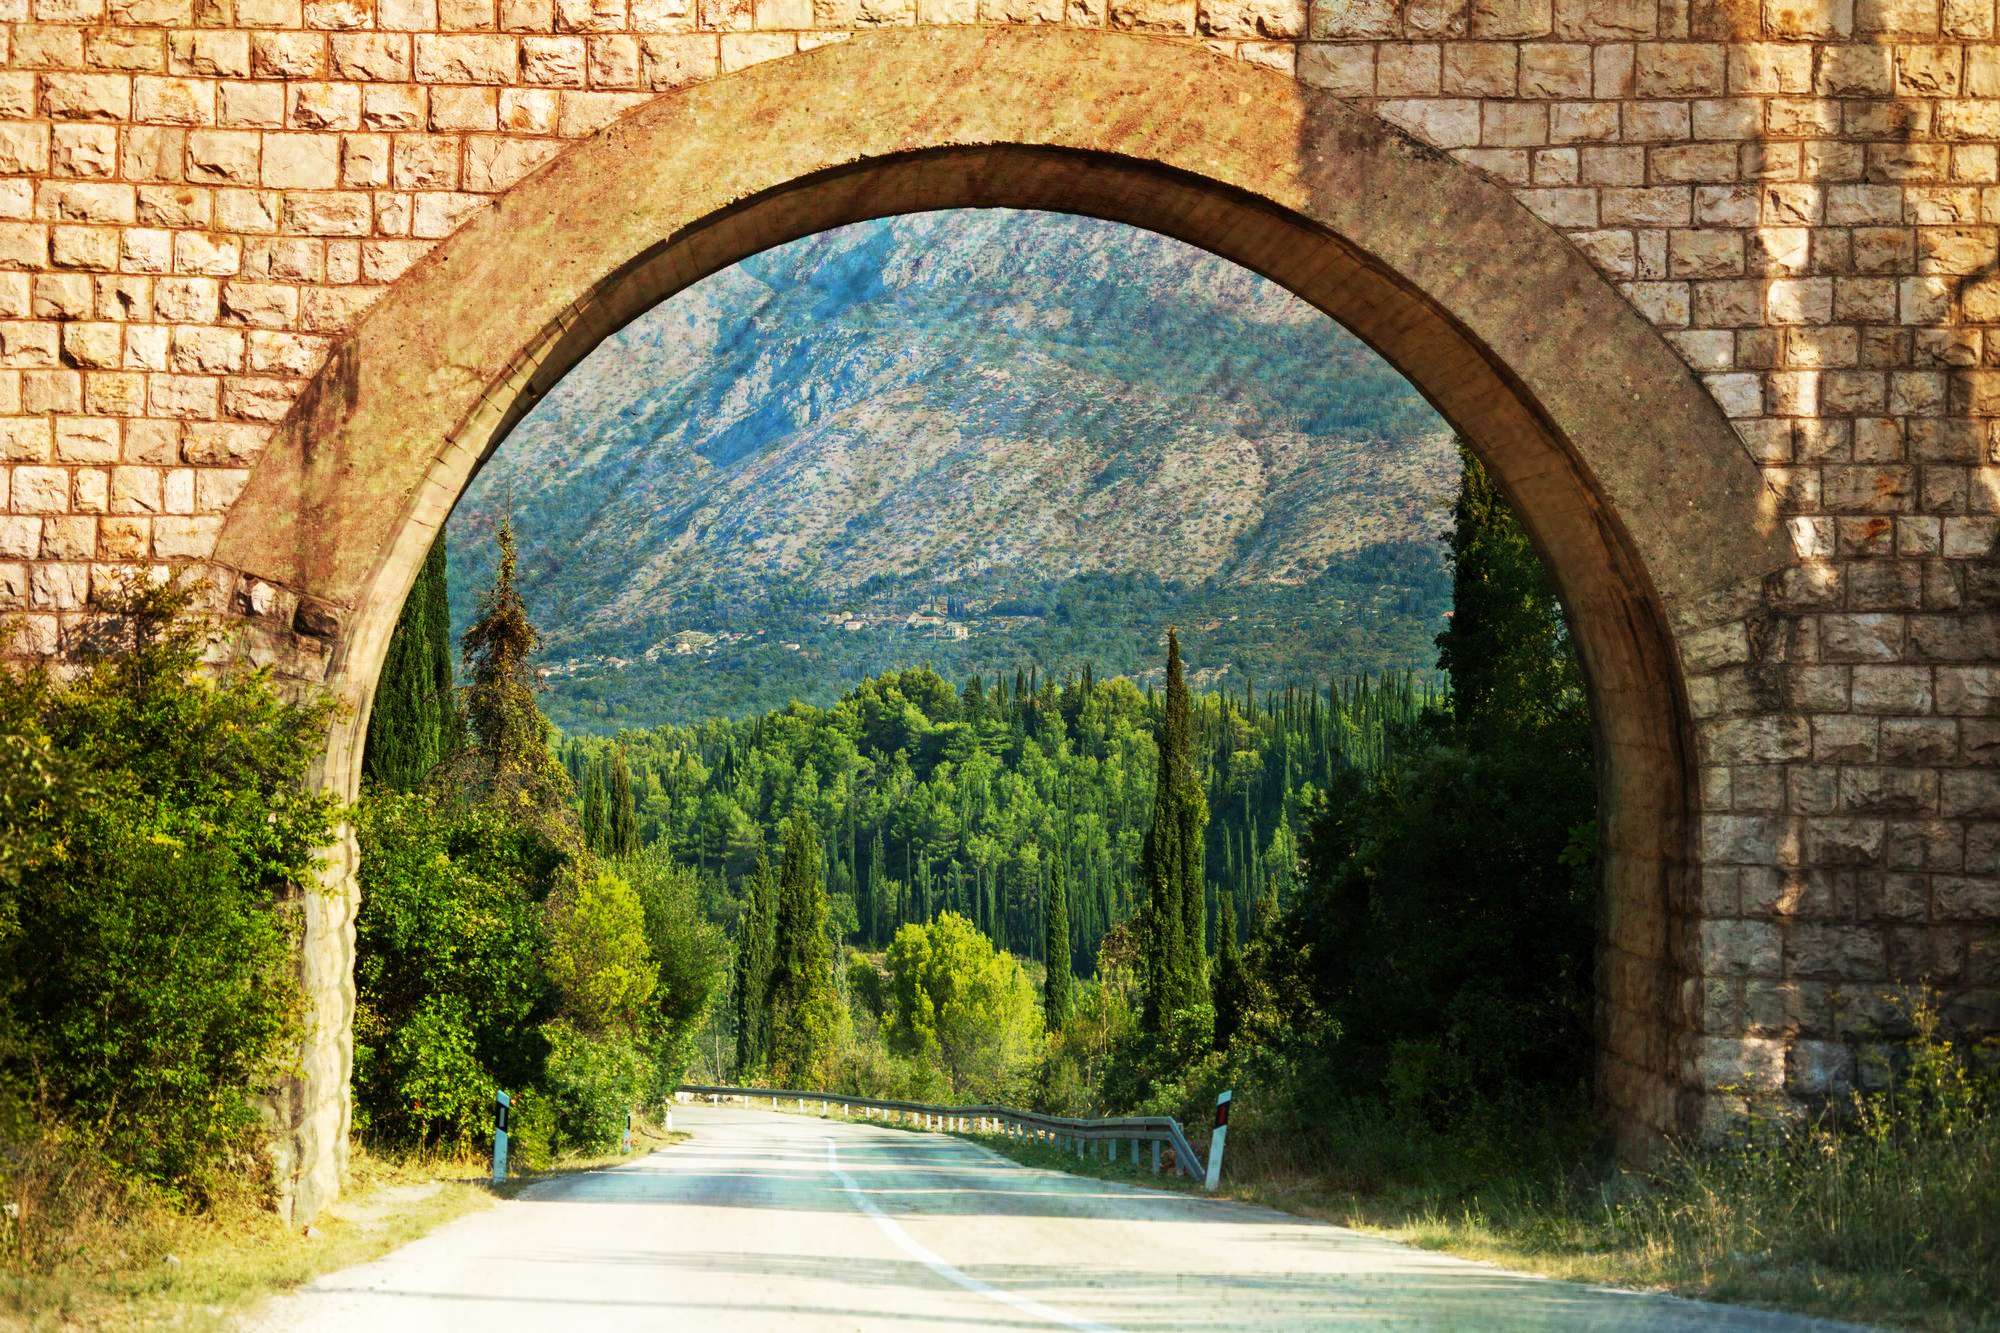 A stone arch over a road leading to a mountain.